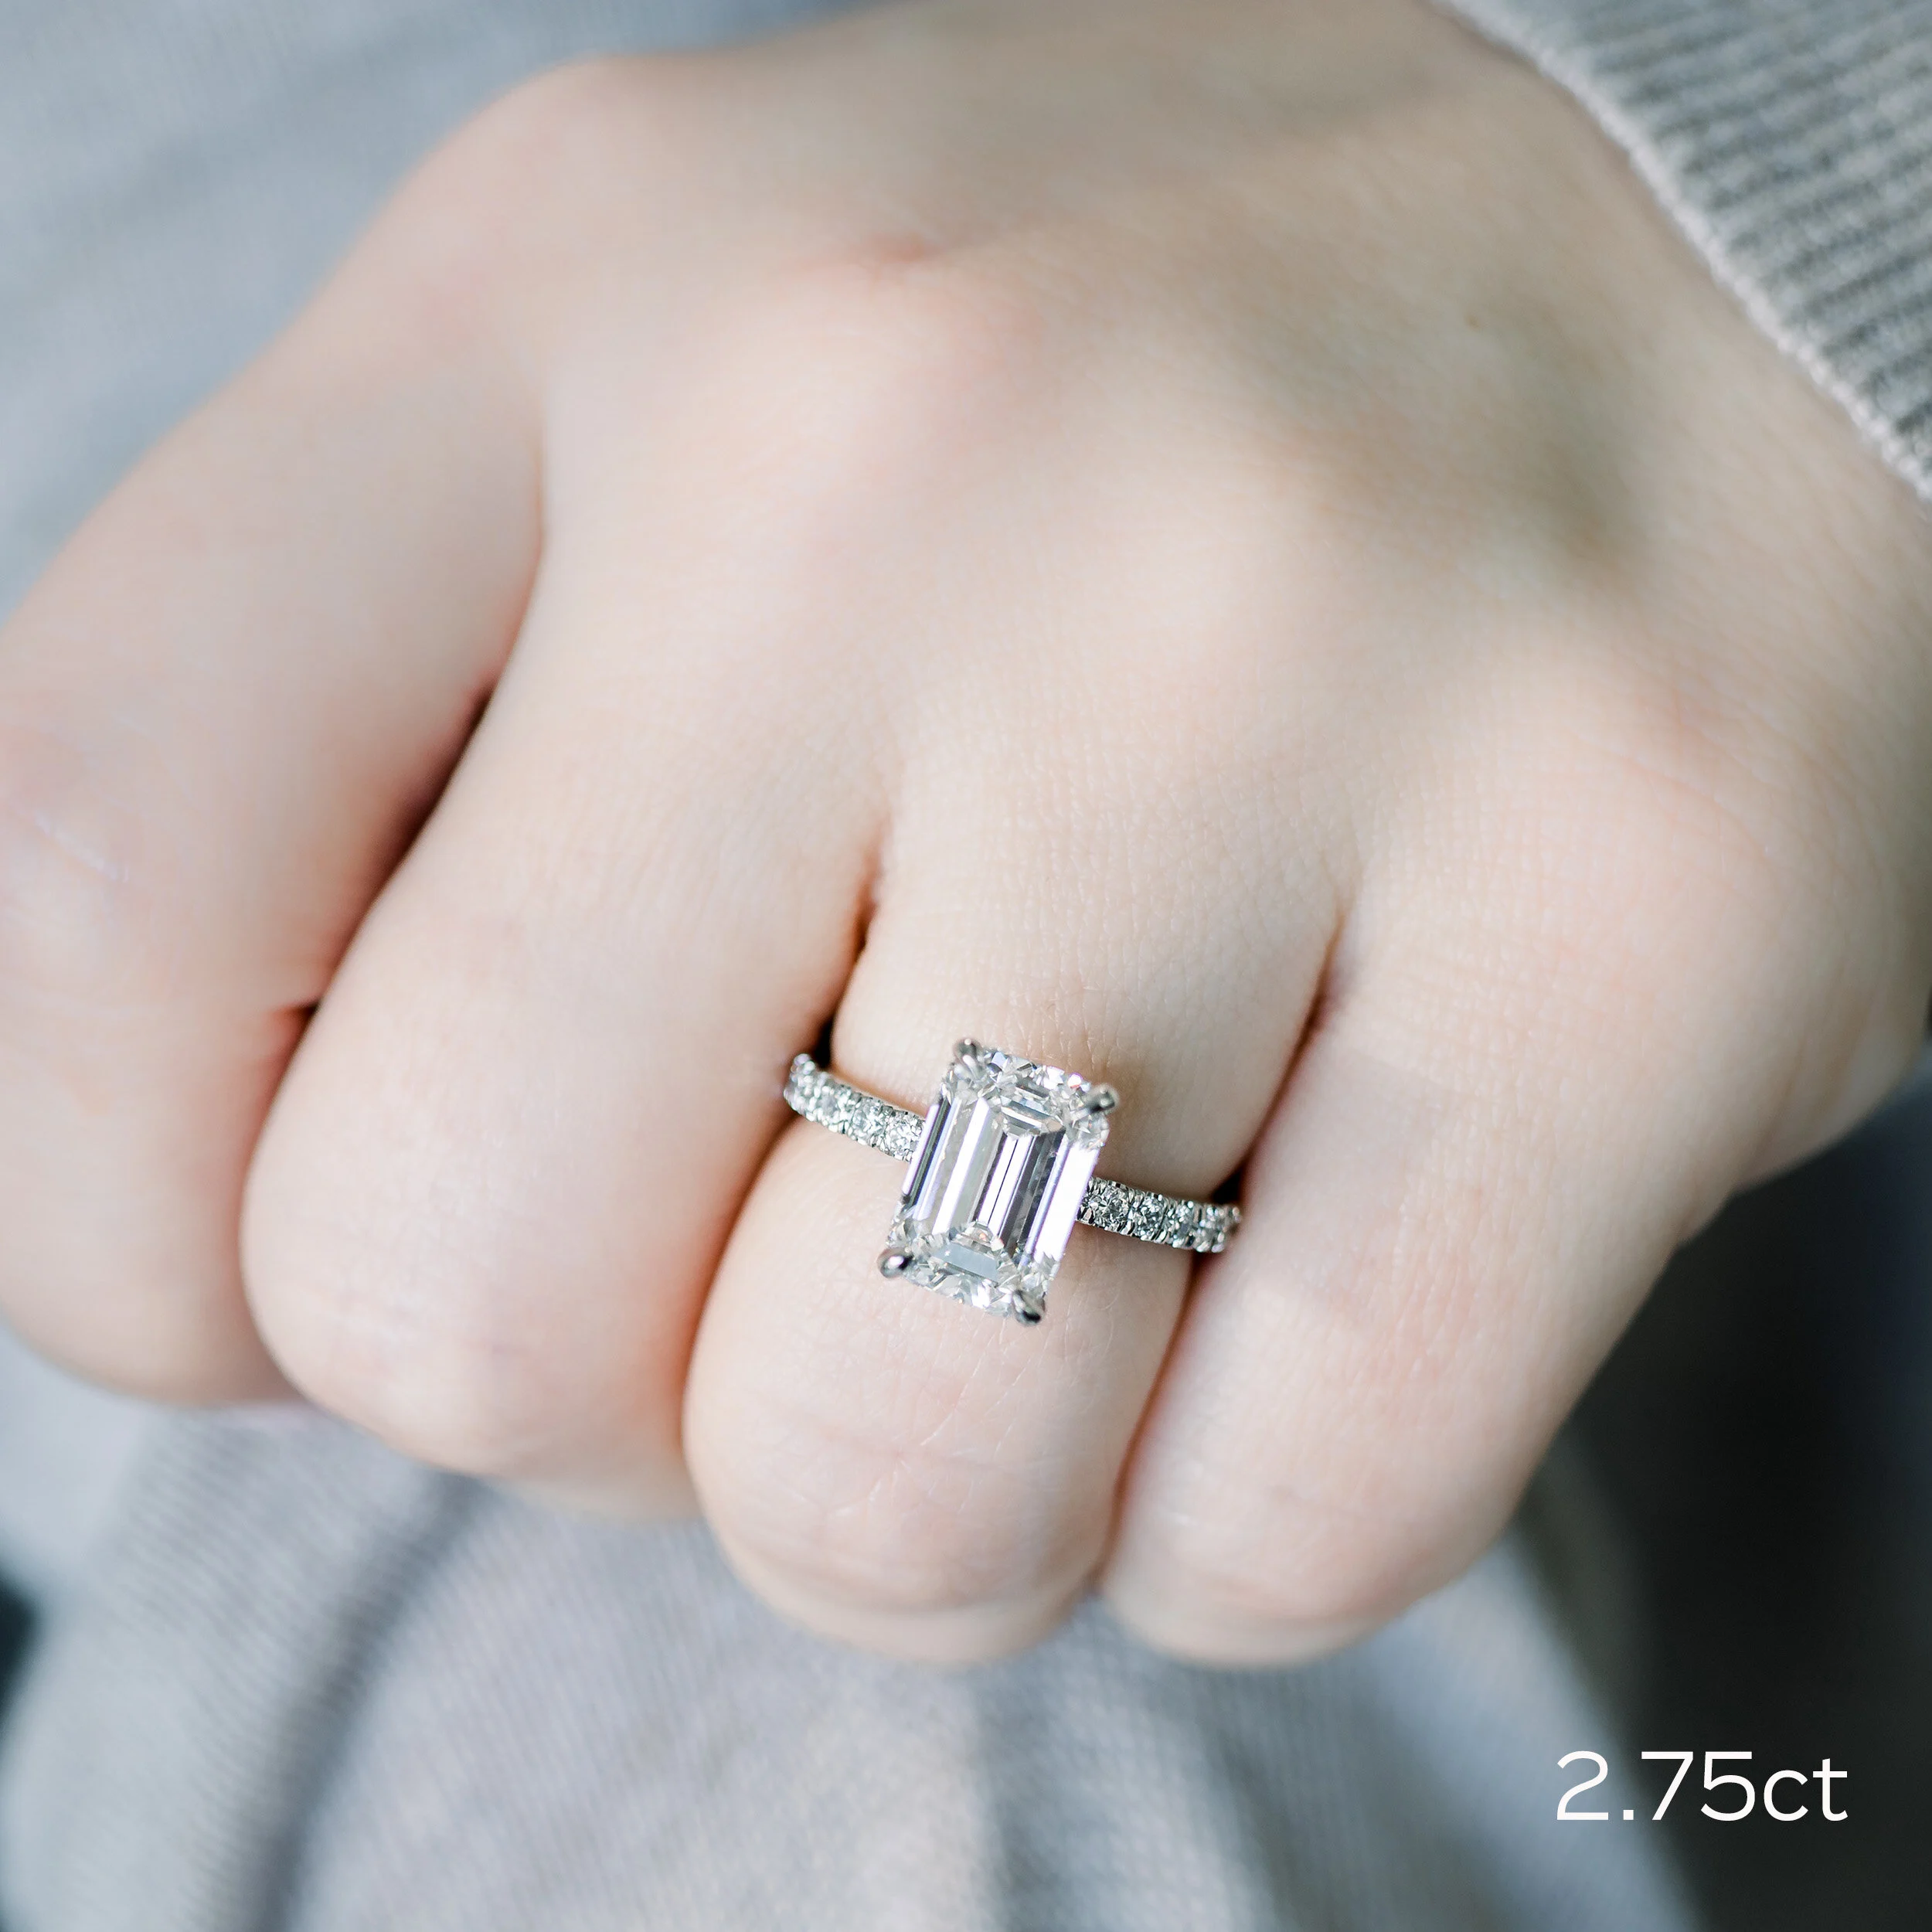 3 Carat Emerald Cut Engagement Ring with Diamond Band made with Lab Diamonds Ada Diamonds Design AD-351 on Model